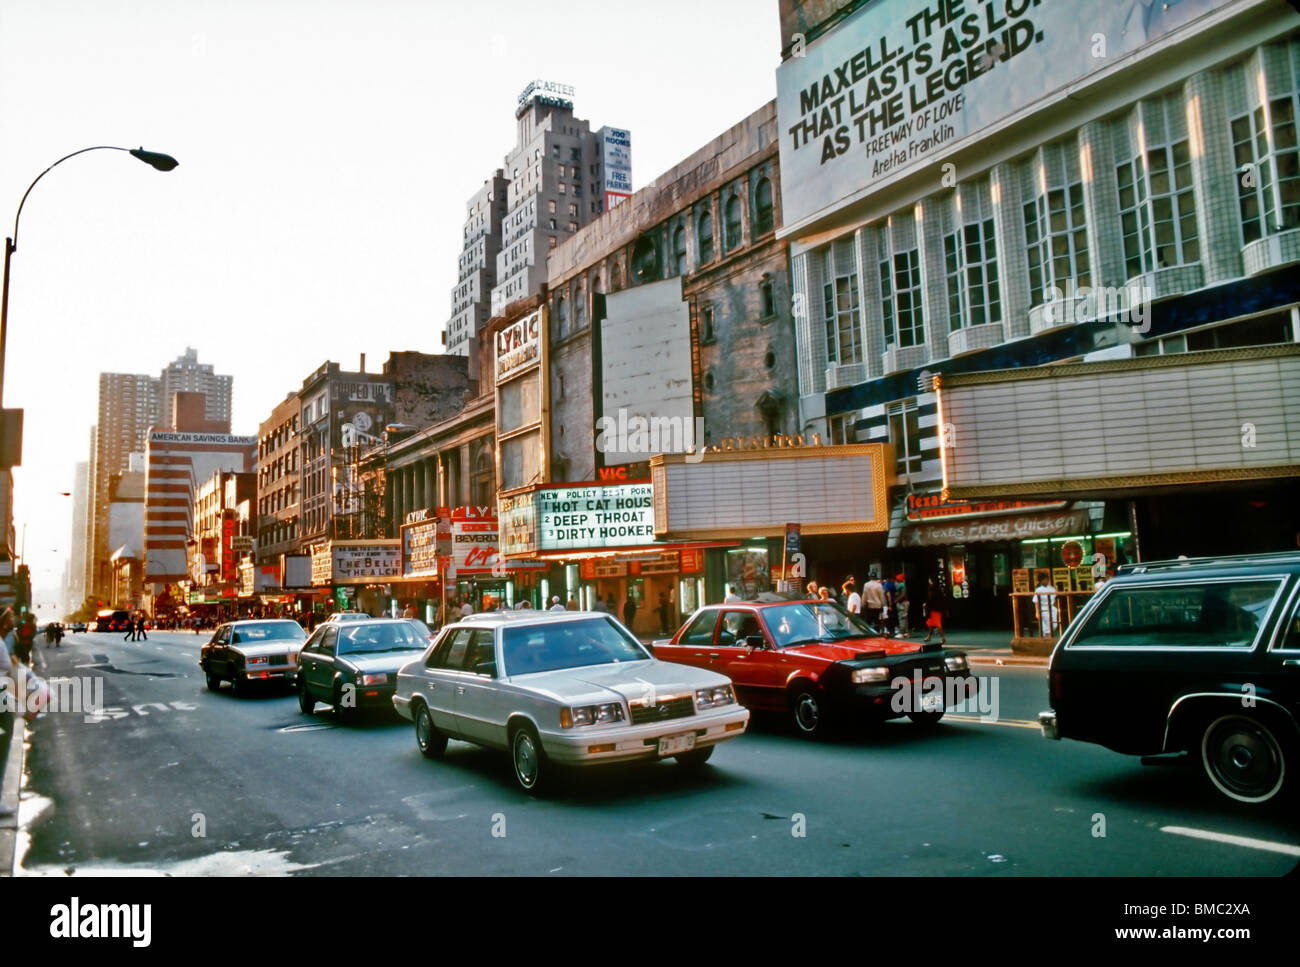 A Nostalgic Trip Down Canal Street, NYC - Consumer Grouch